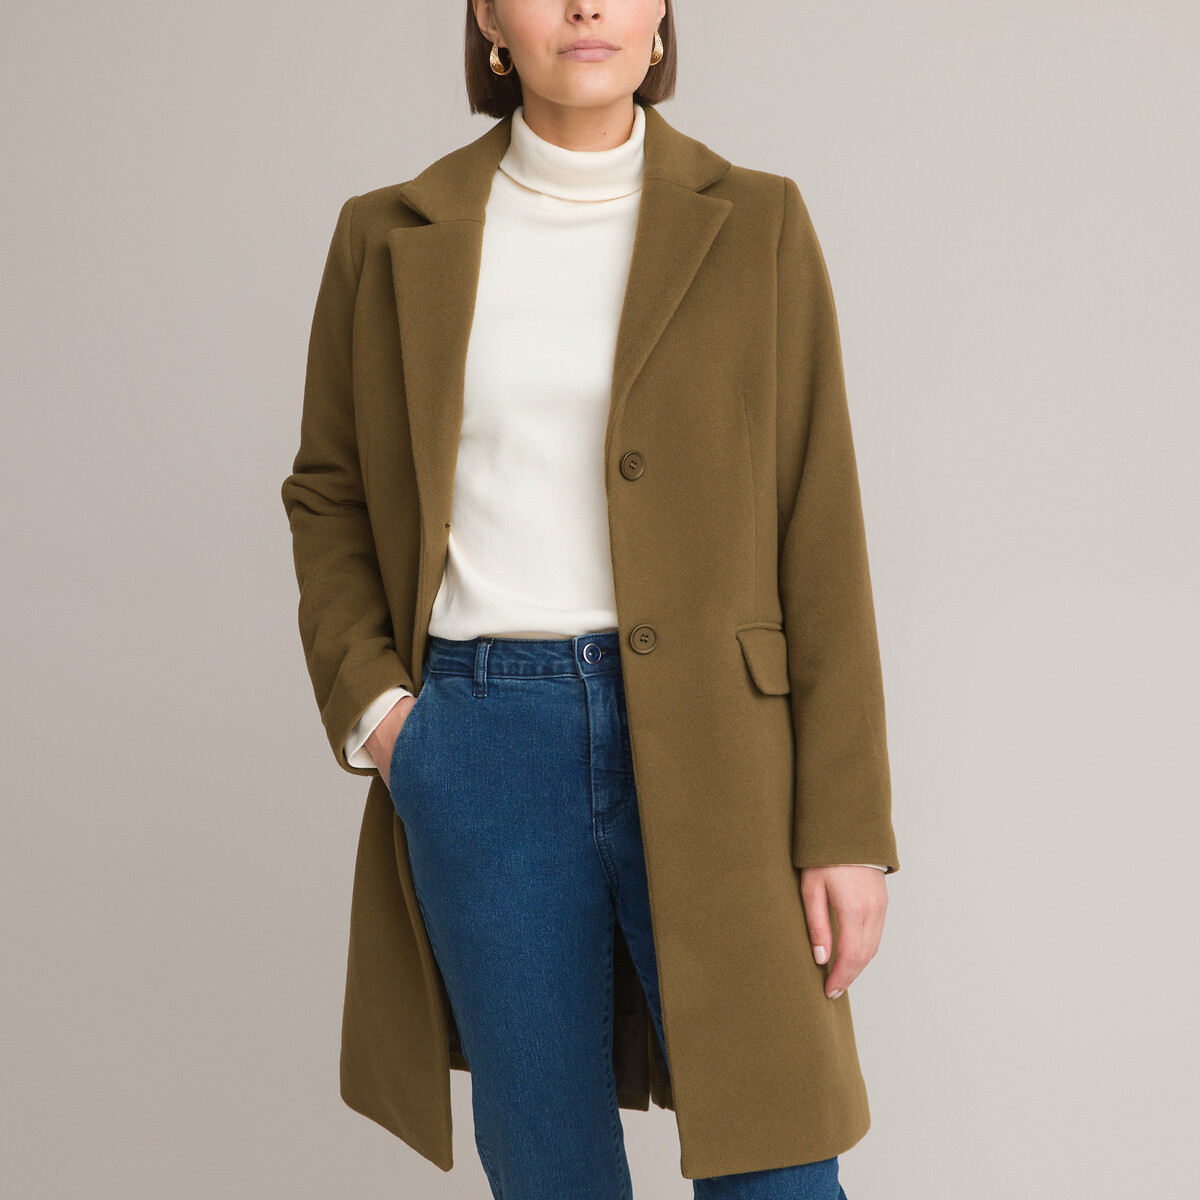 Image of Wool/Cashmere Mix Single-Breasted Coat with Pockets